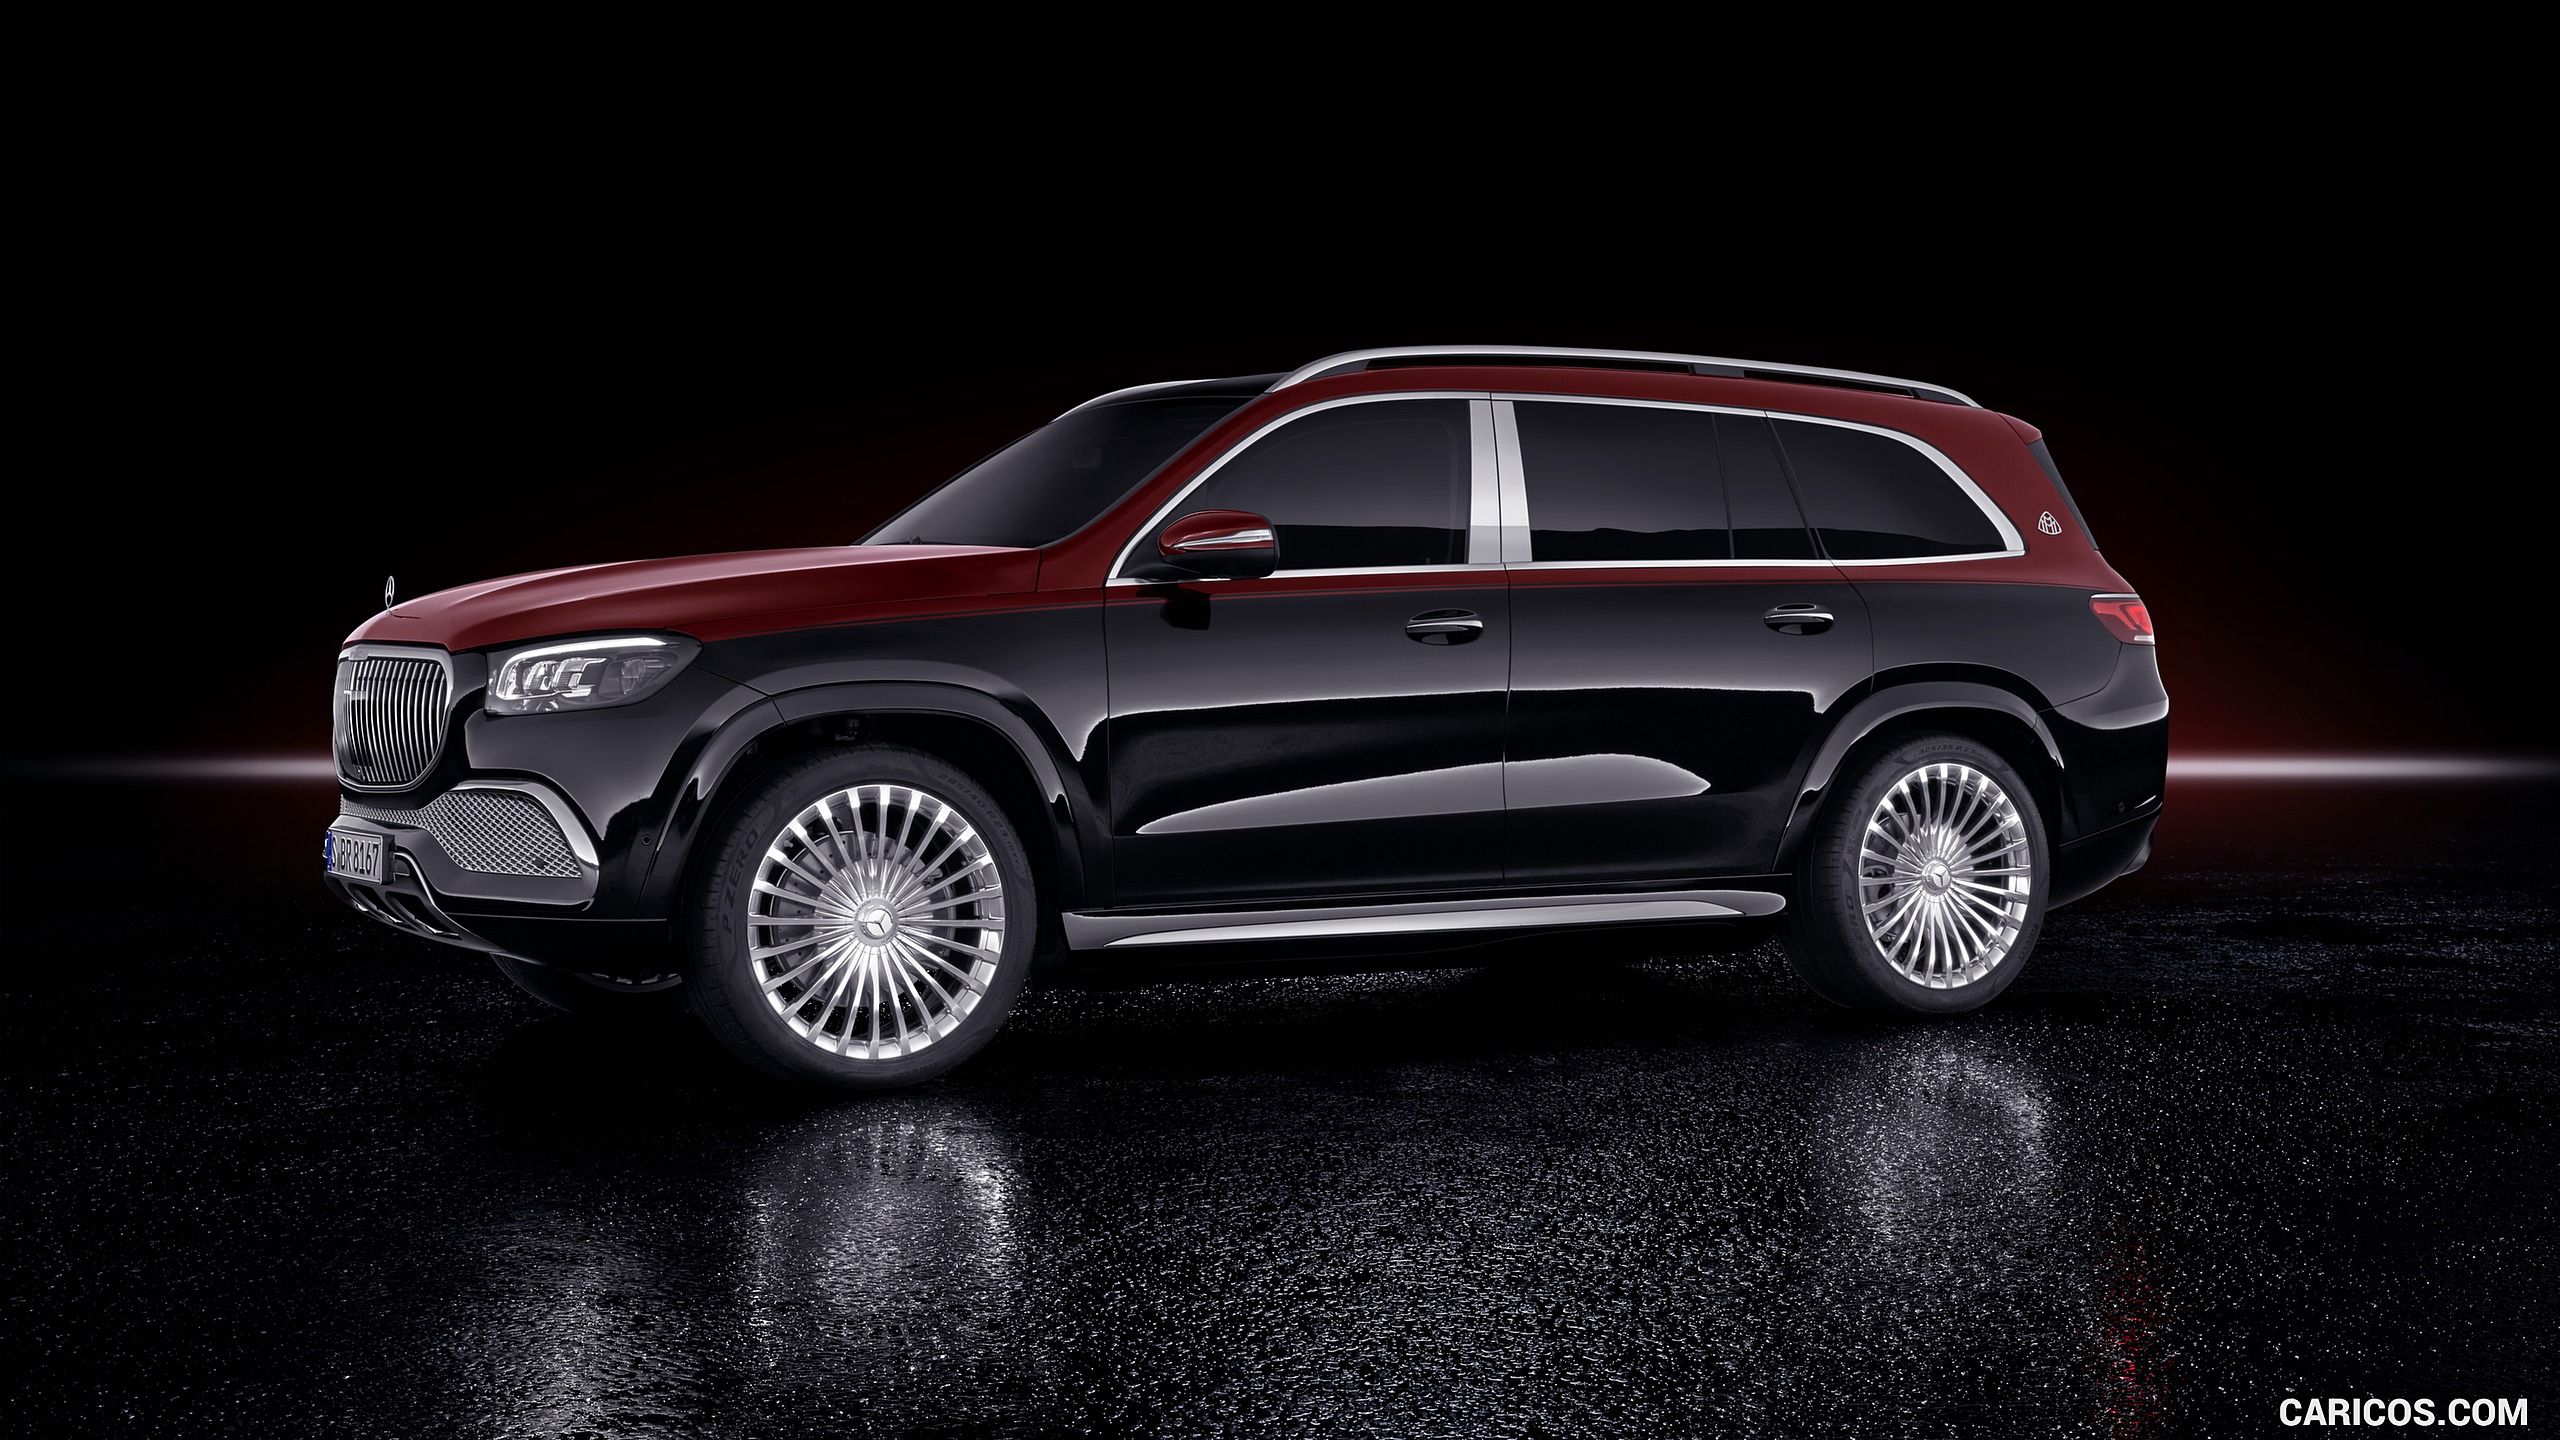 Mercedes Maybach GLS 600 (Color: Rubellite Red / Obsidian Black). HD Wallpaper